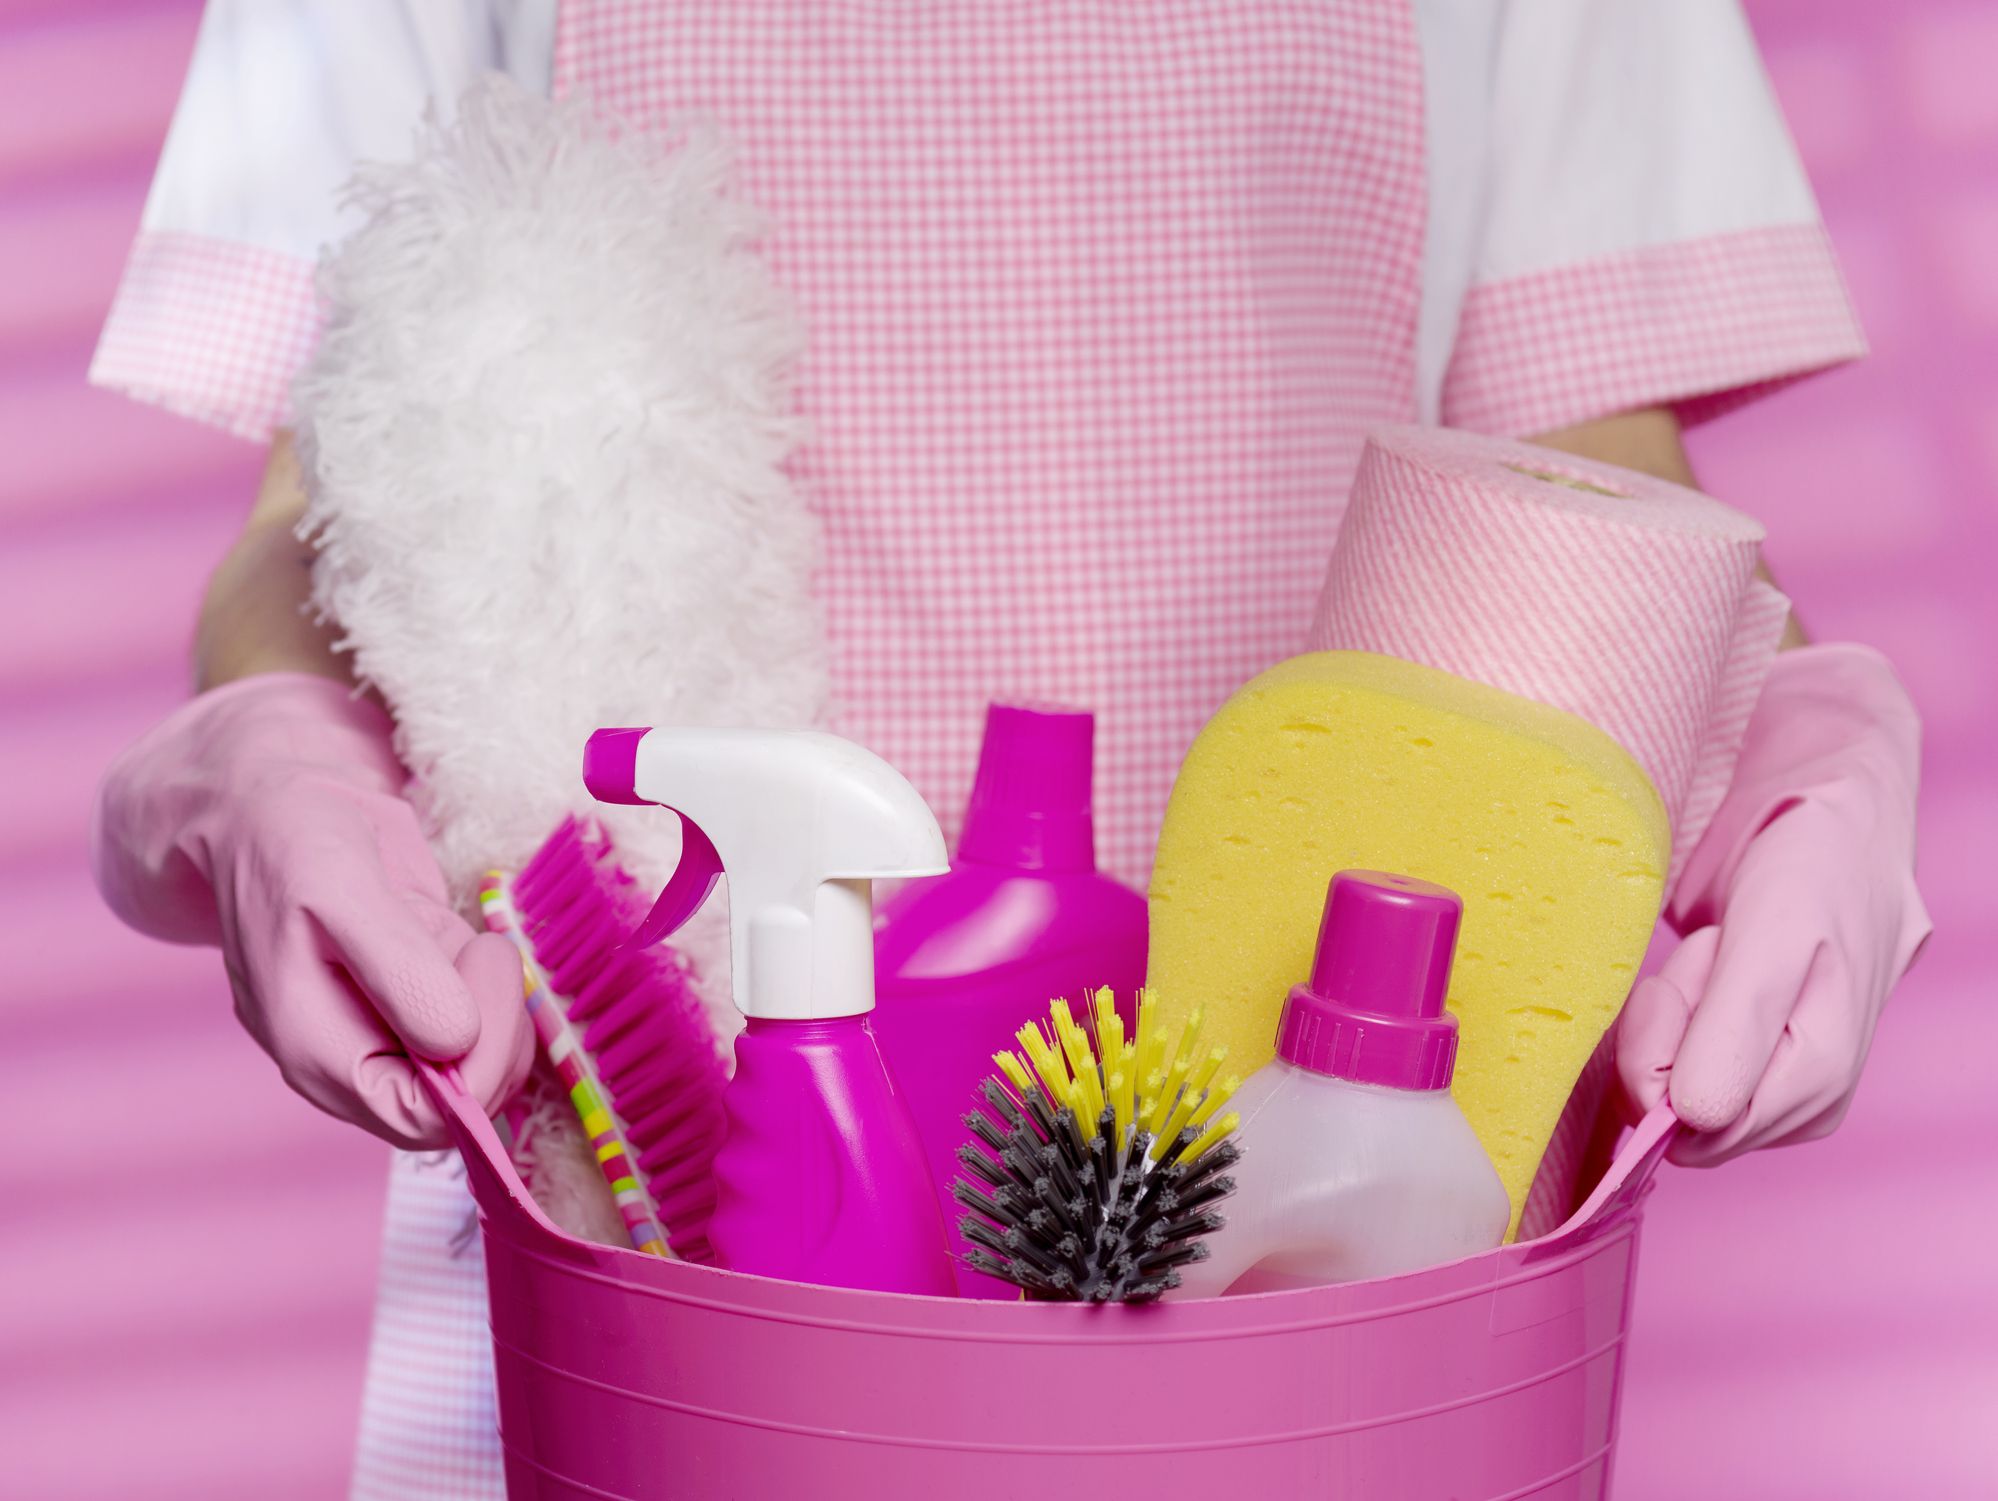 12 brilliant time-saving cleaning hacks